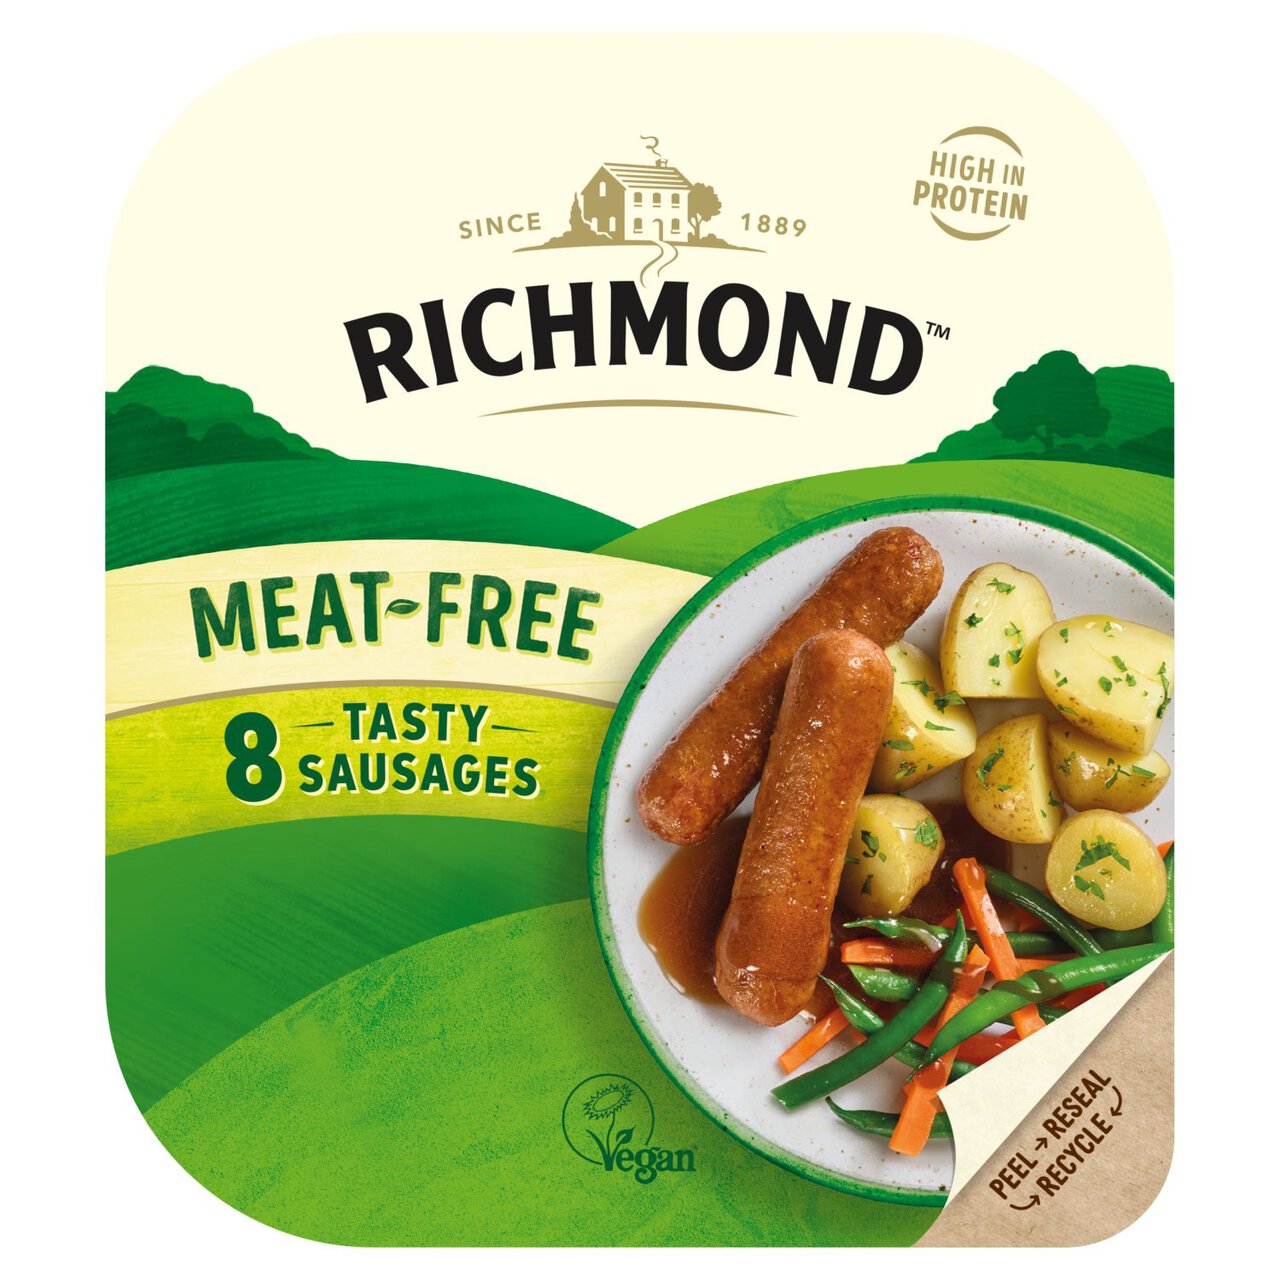 Richmond Meat Free Sausages 304g